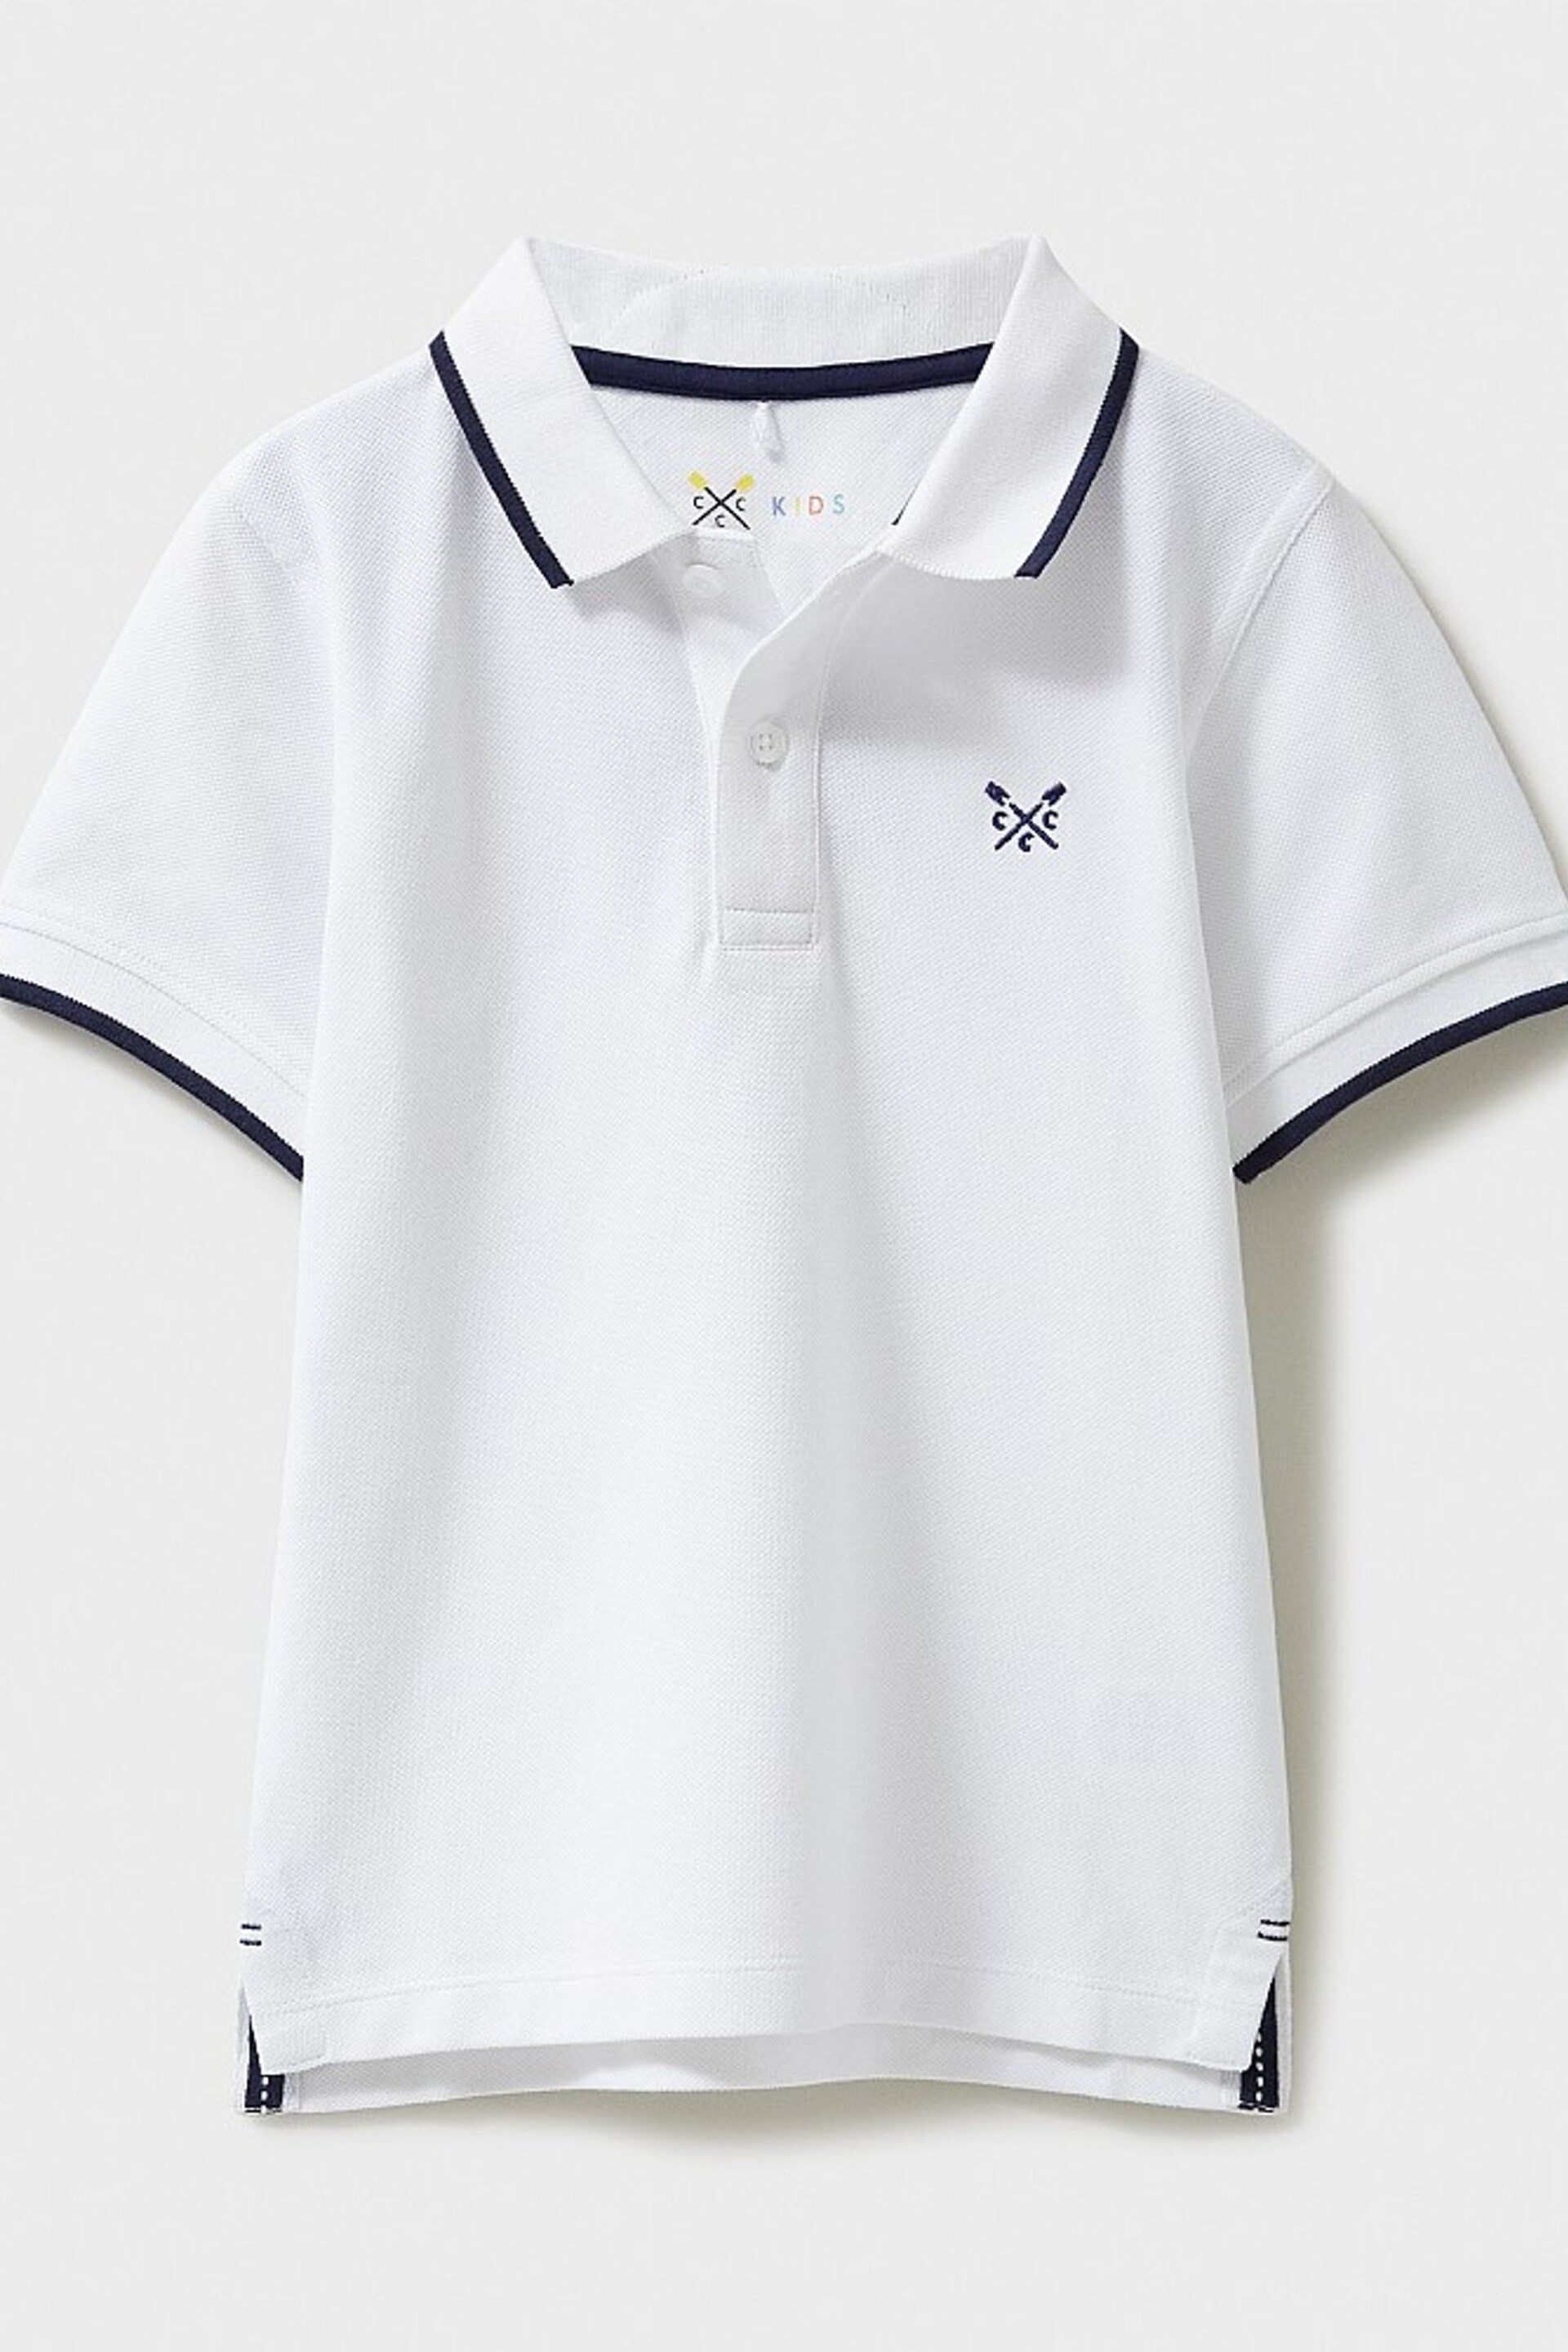 Crew Clothing Tipped Pique Short Sleeve Polo Shirt - Image 3 of 5